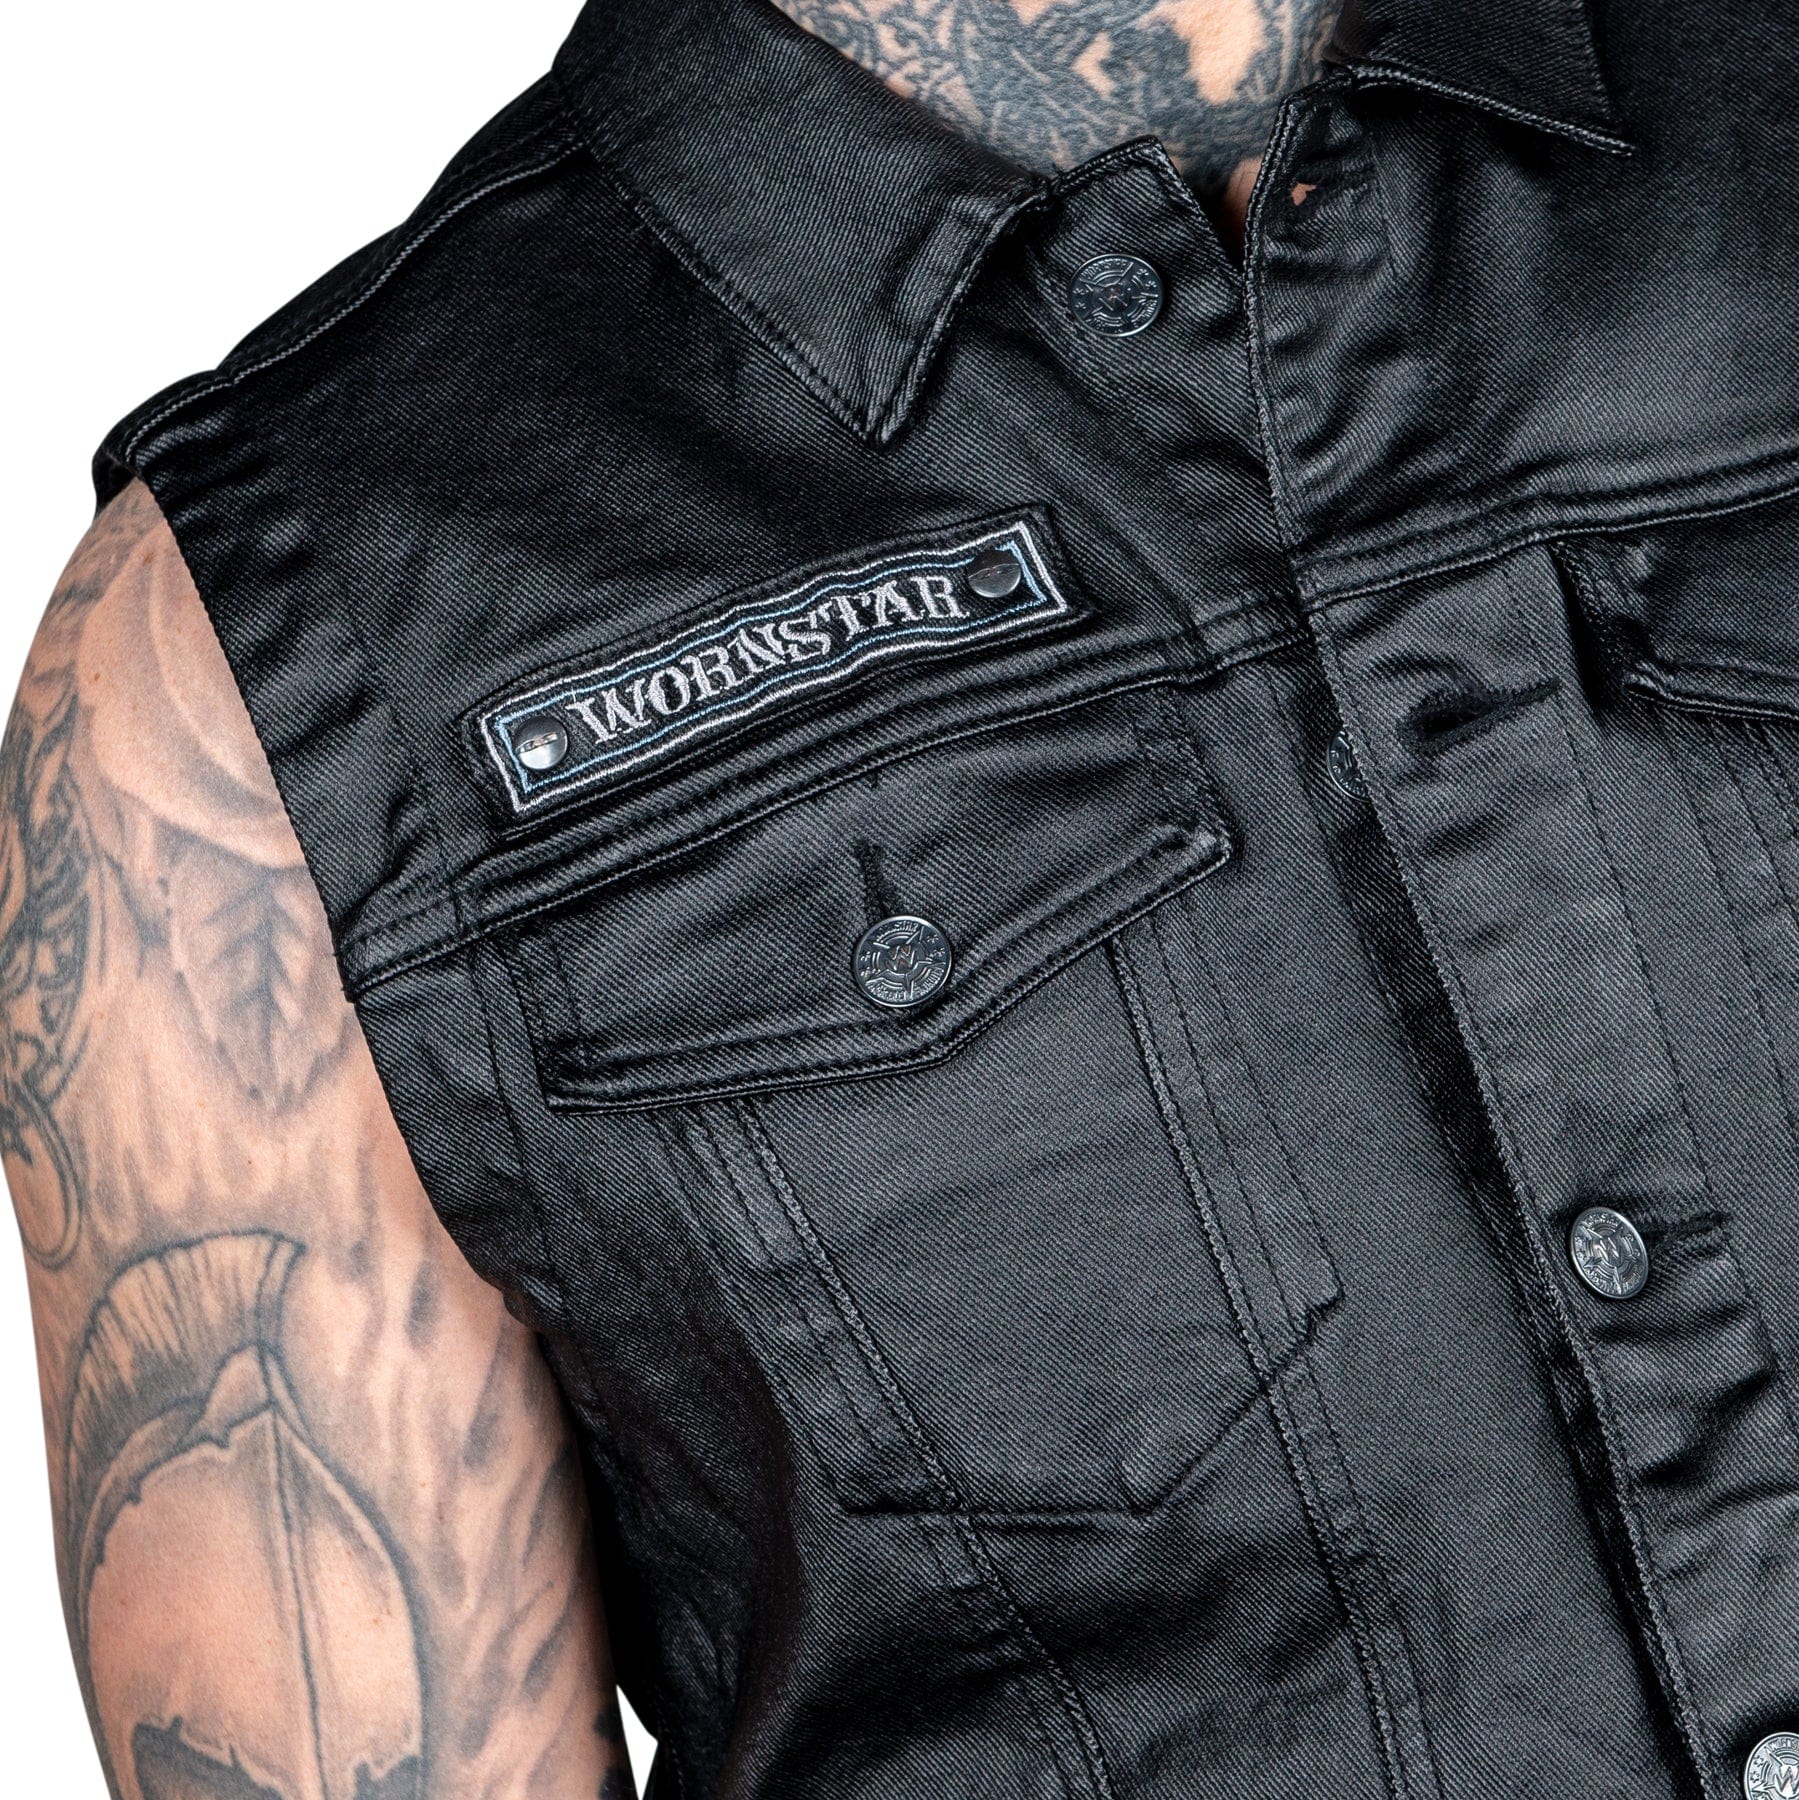 All Access Collection Jacket Idolmaker Waxed Denim Vest